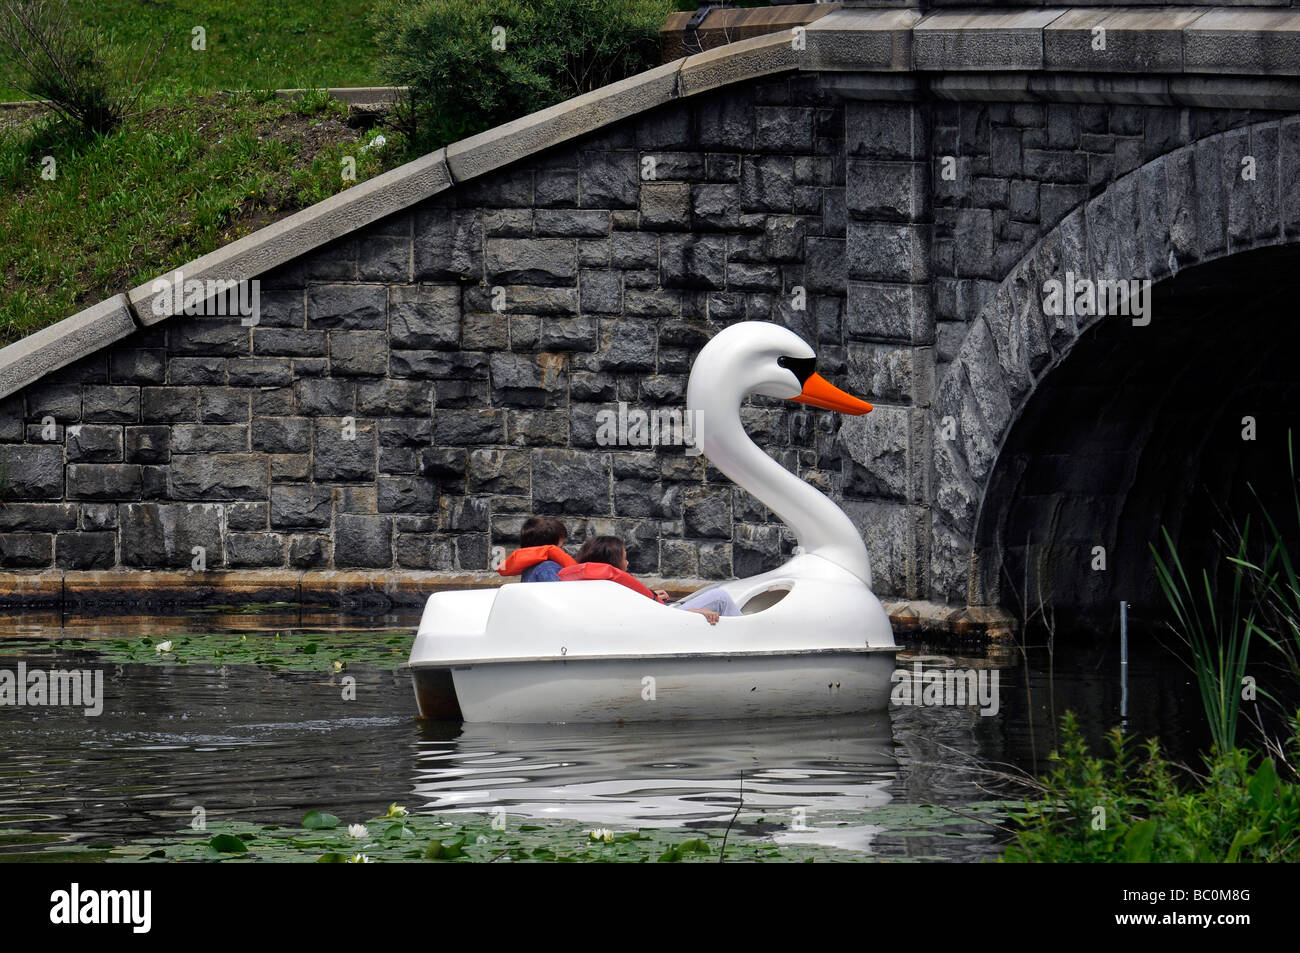 Young boy and girl in paddle boat in  park Stock Photo